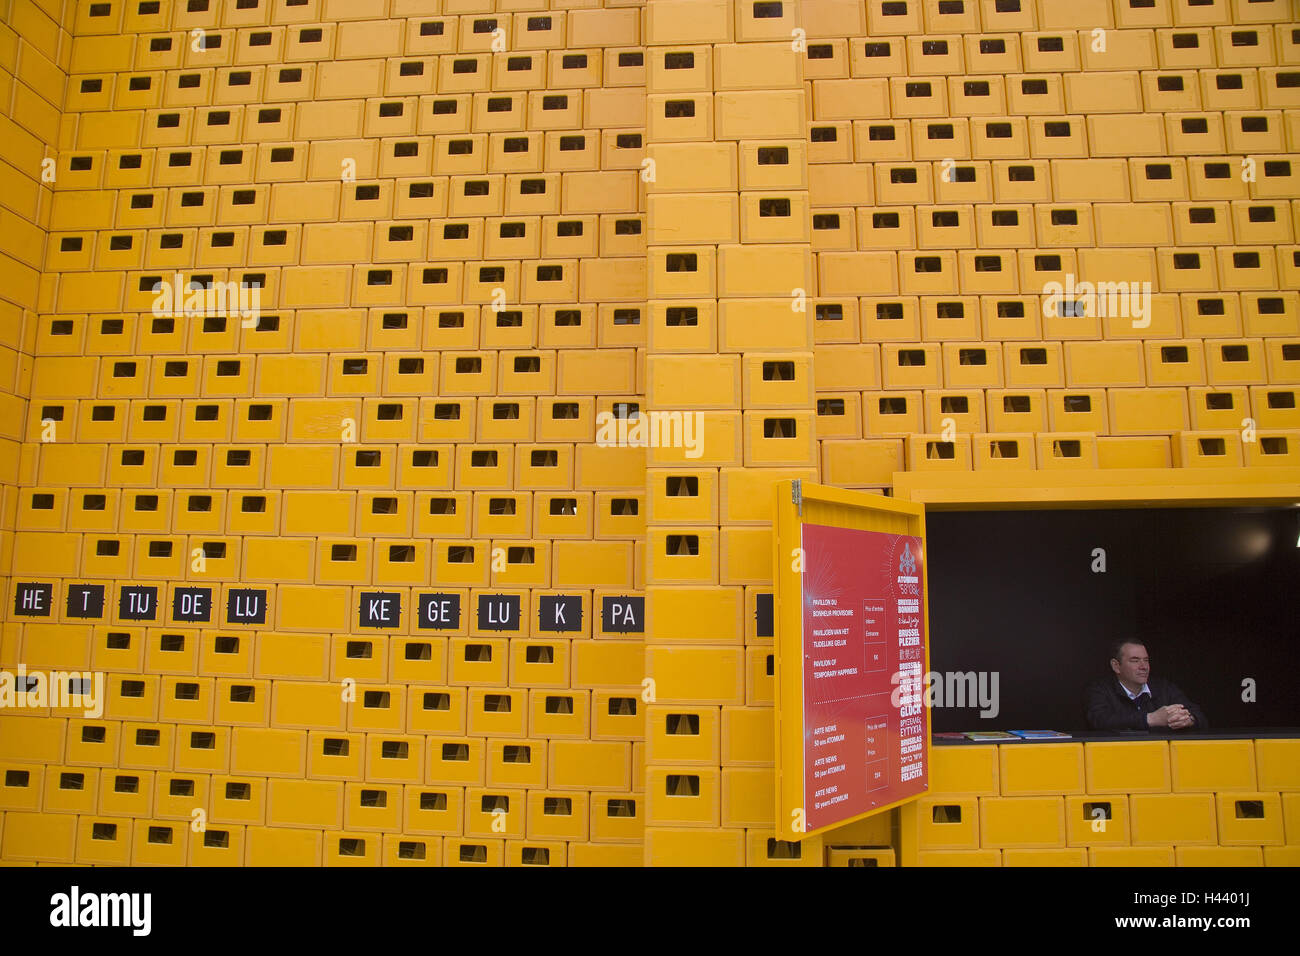 Belgium, Brussels, Heysel stadium, facade, yellow, detail, man, card advance beech trees, no model release, Europe, Benelux, Flanders, to Westflandern, town, capital, building, Heysel, stadium, architecture, person, outside, sales, cards, switches, ticket switches, information switches, Stock Photo